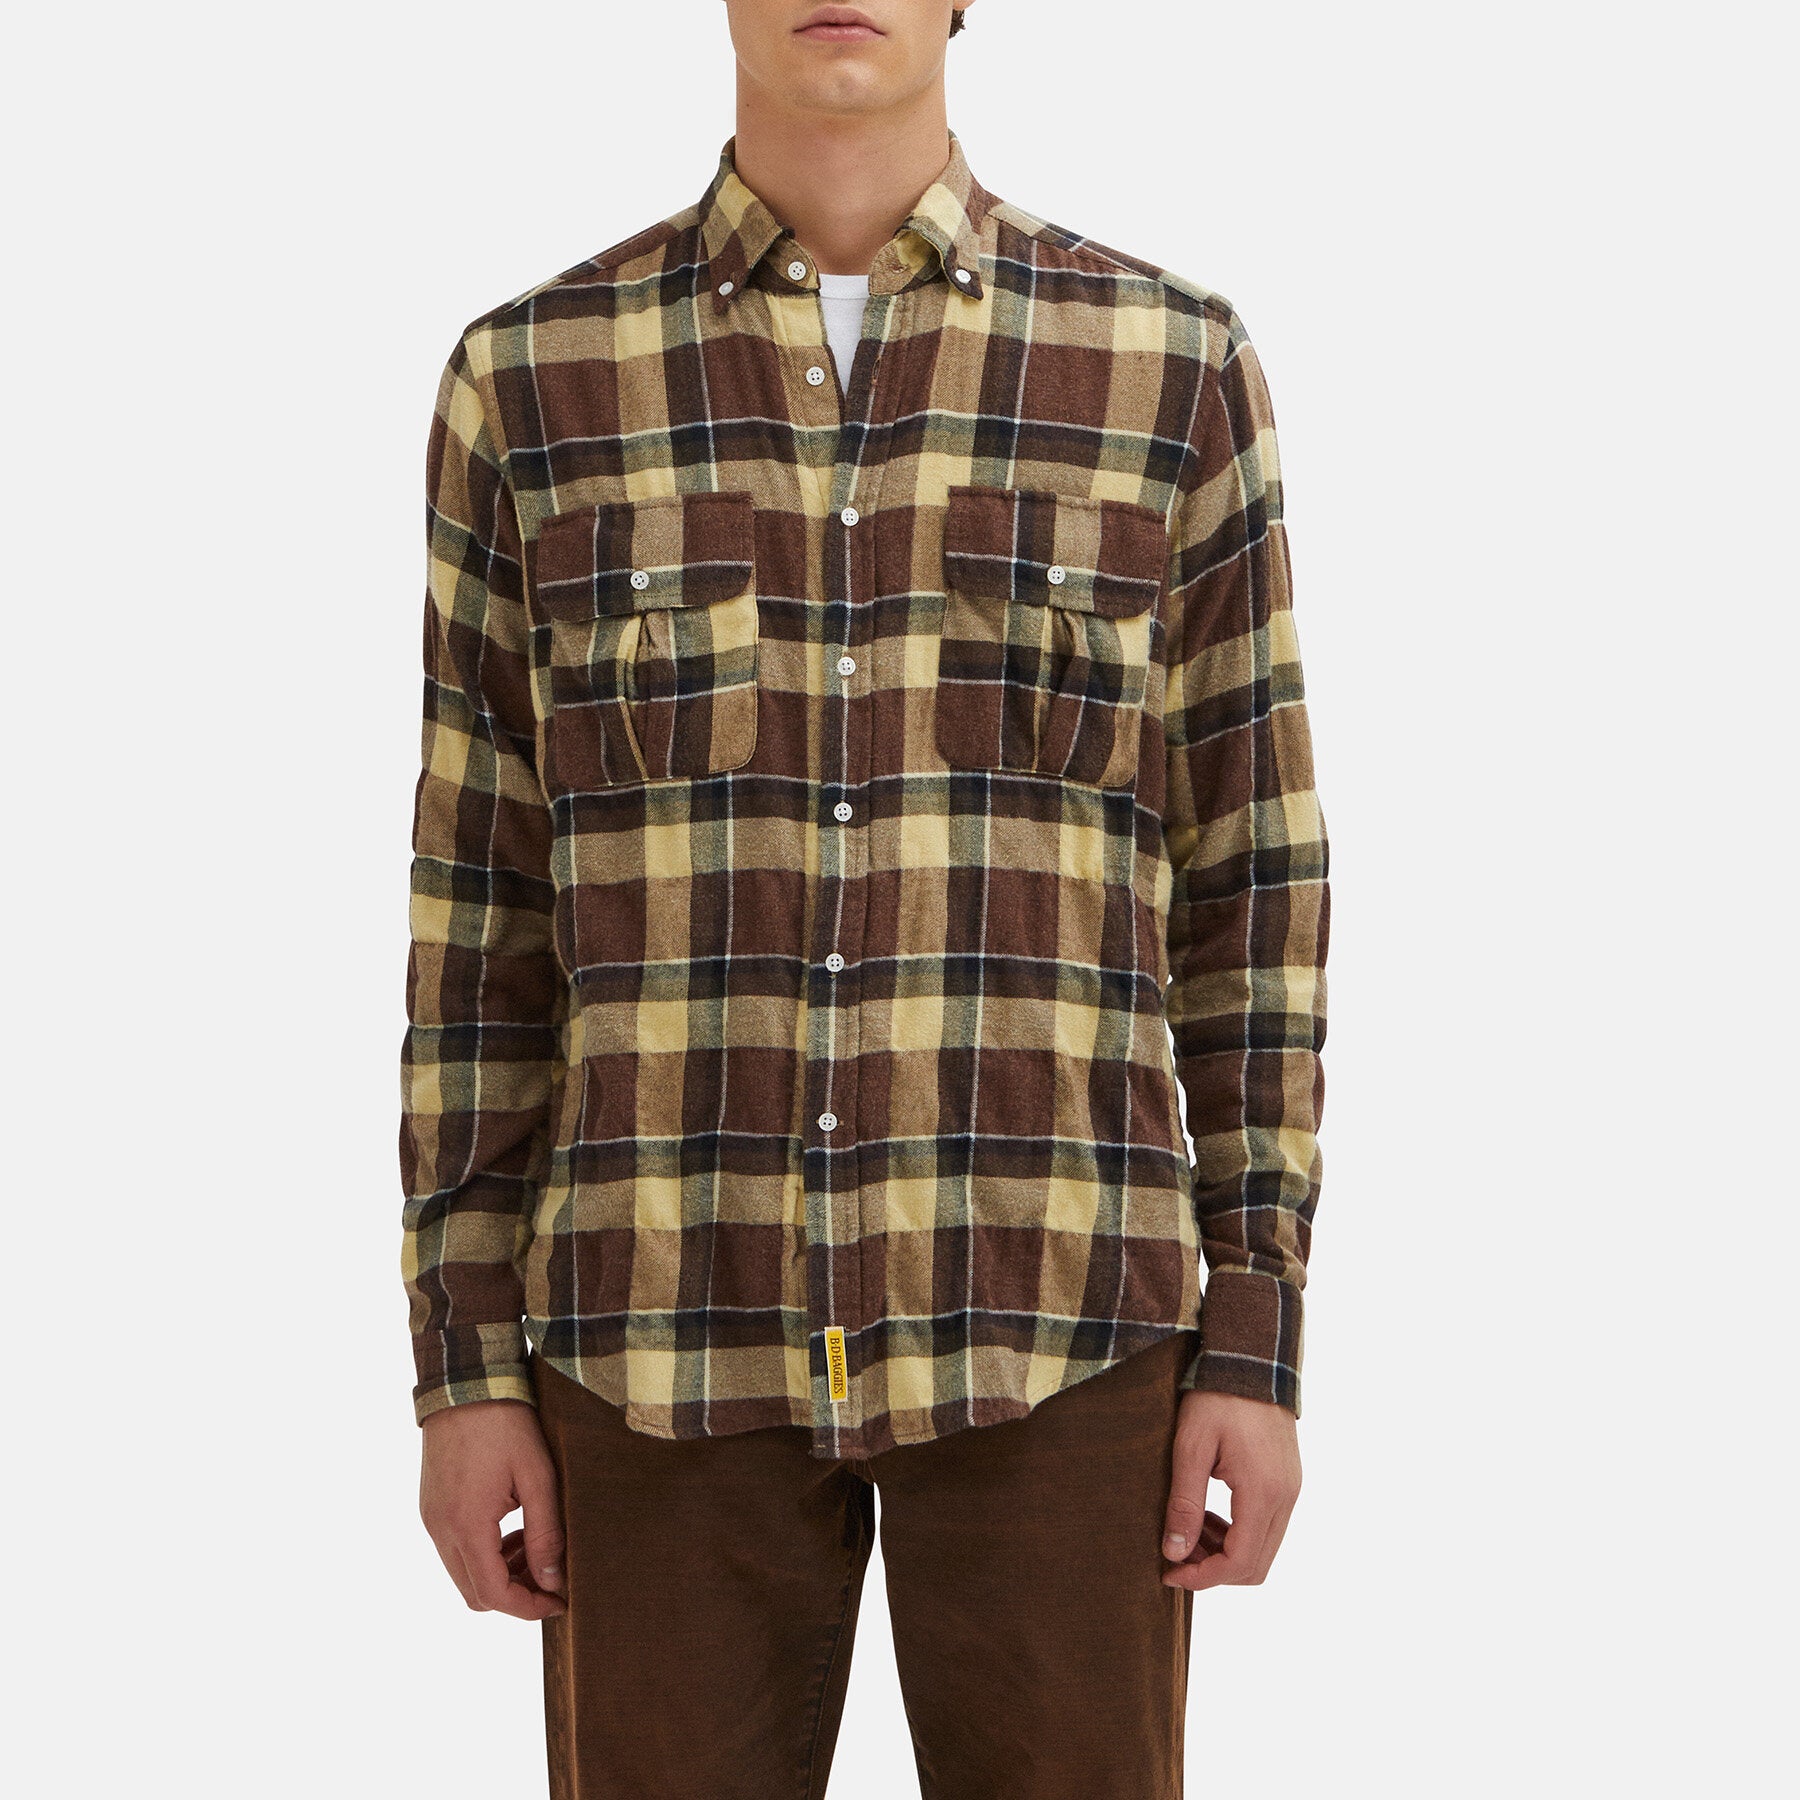 Shirt with madras pattern